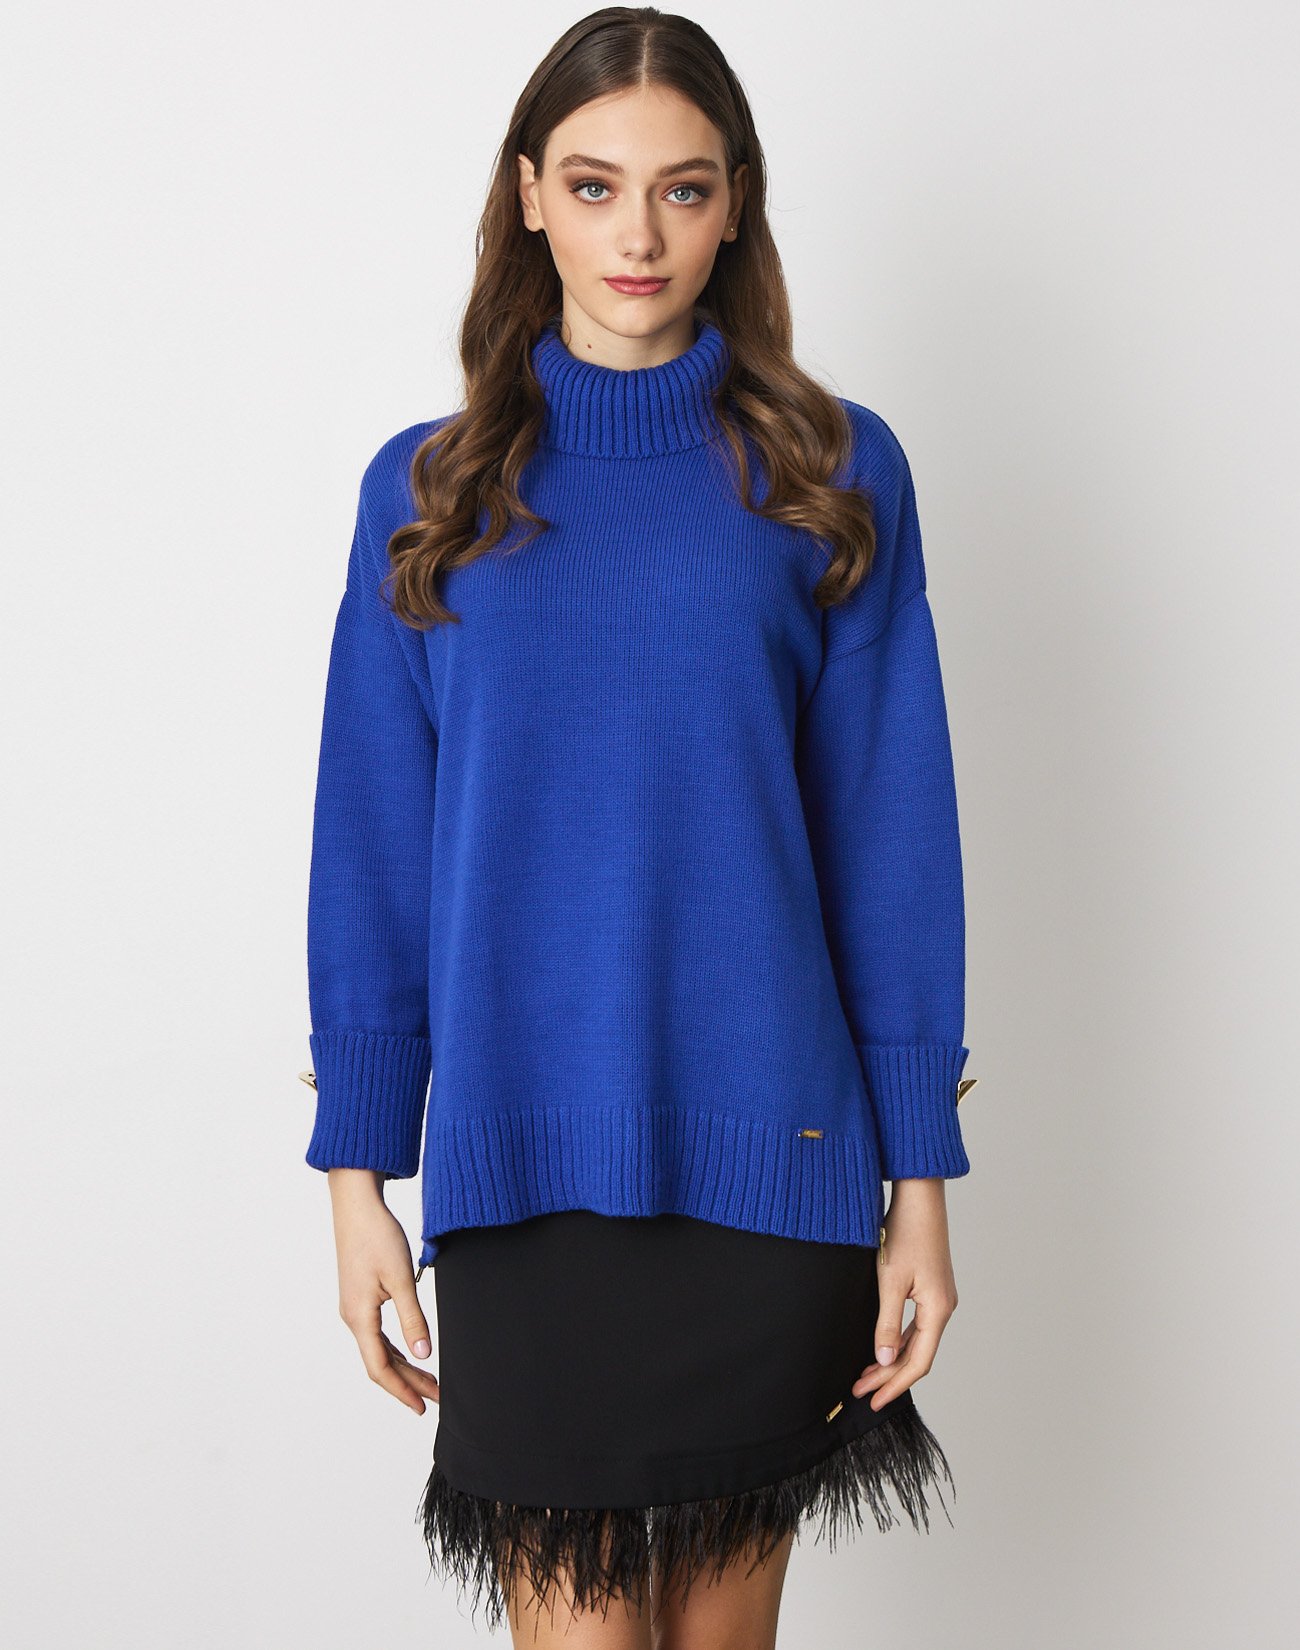 Knit top with zip